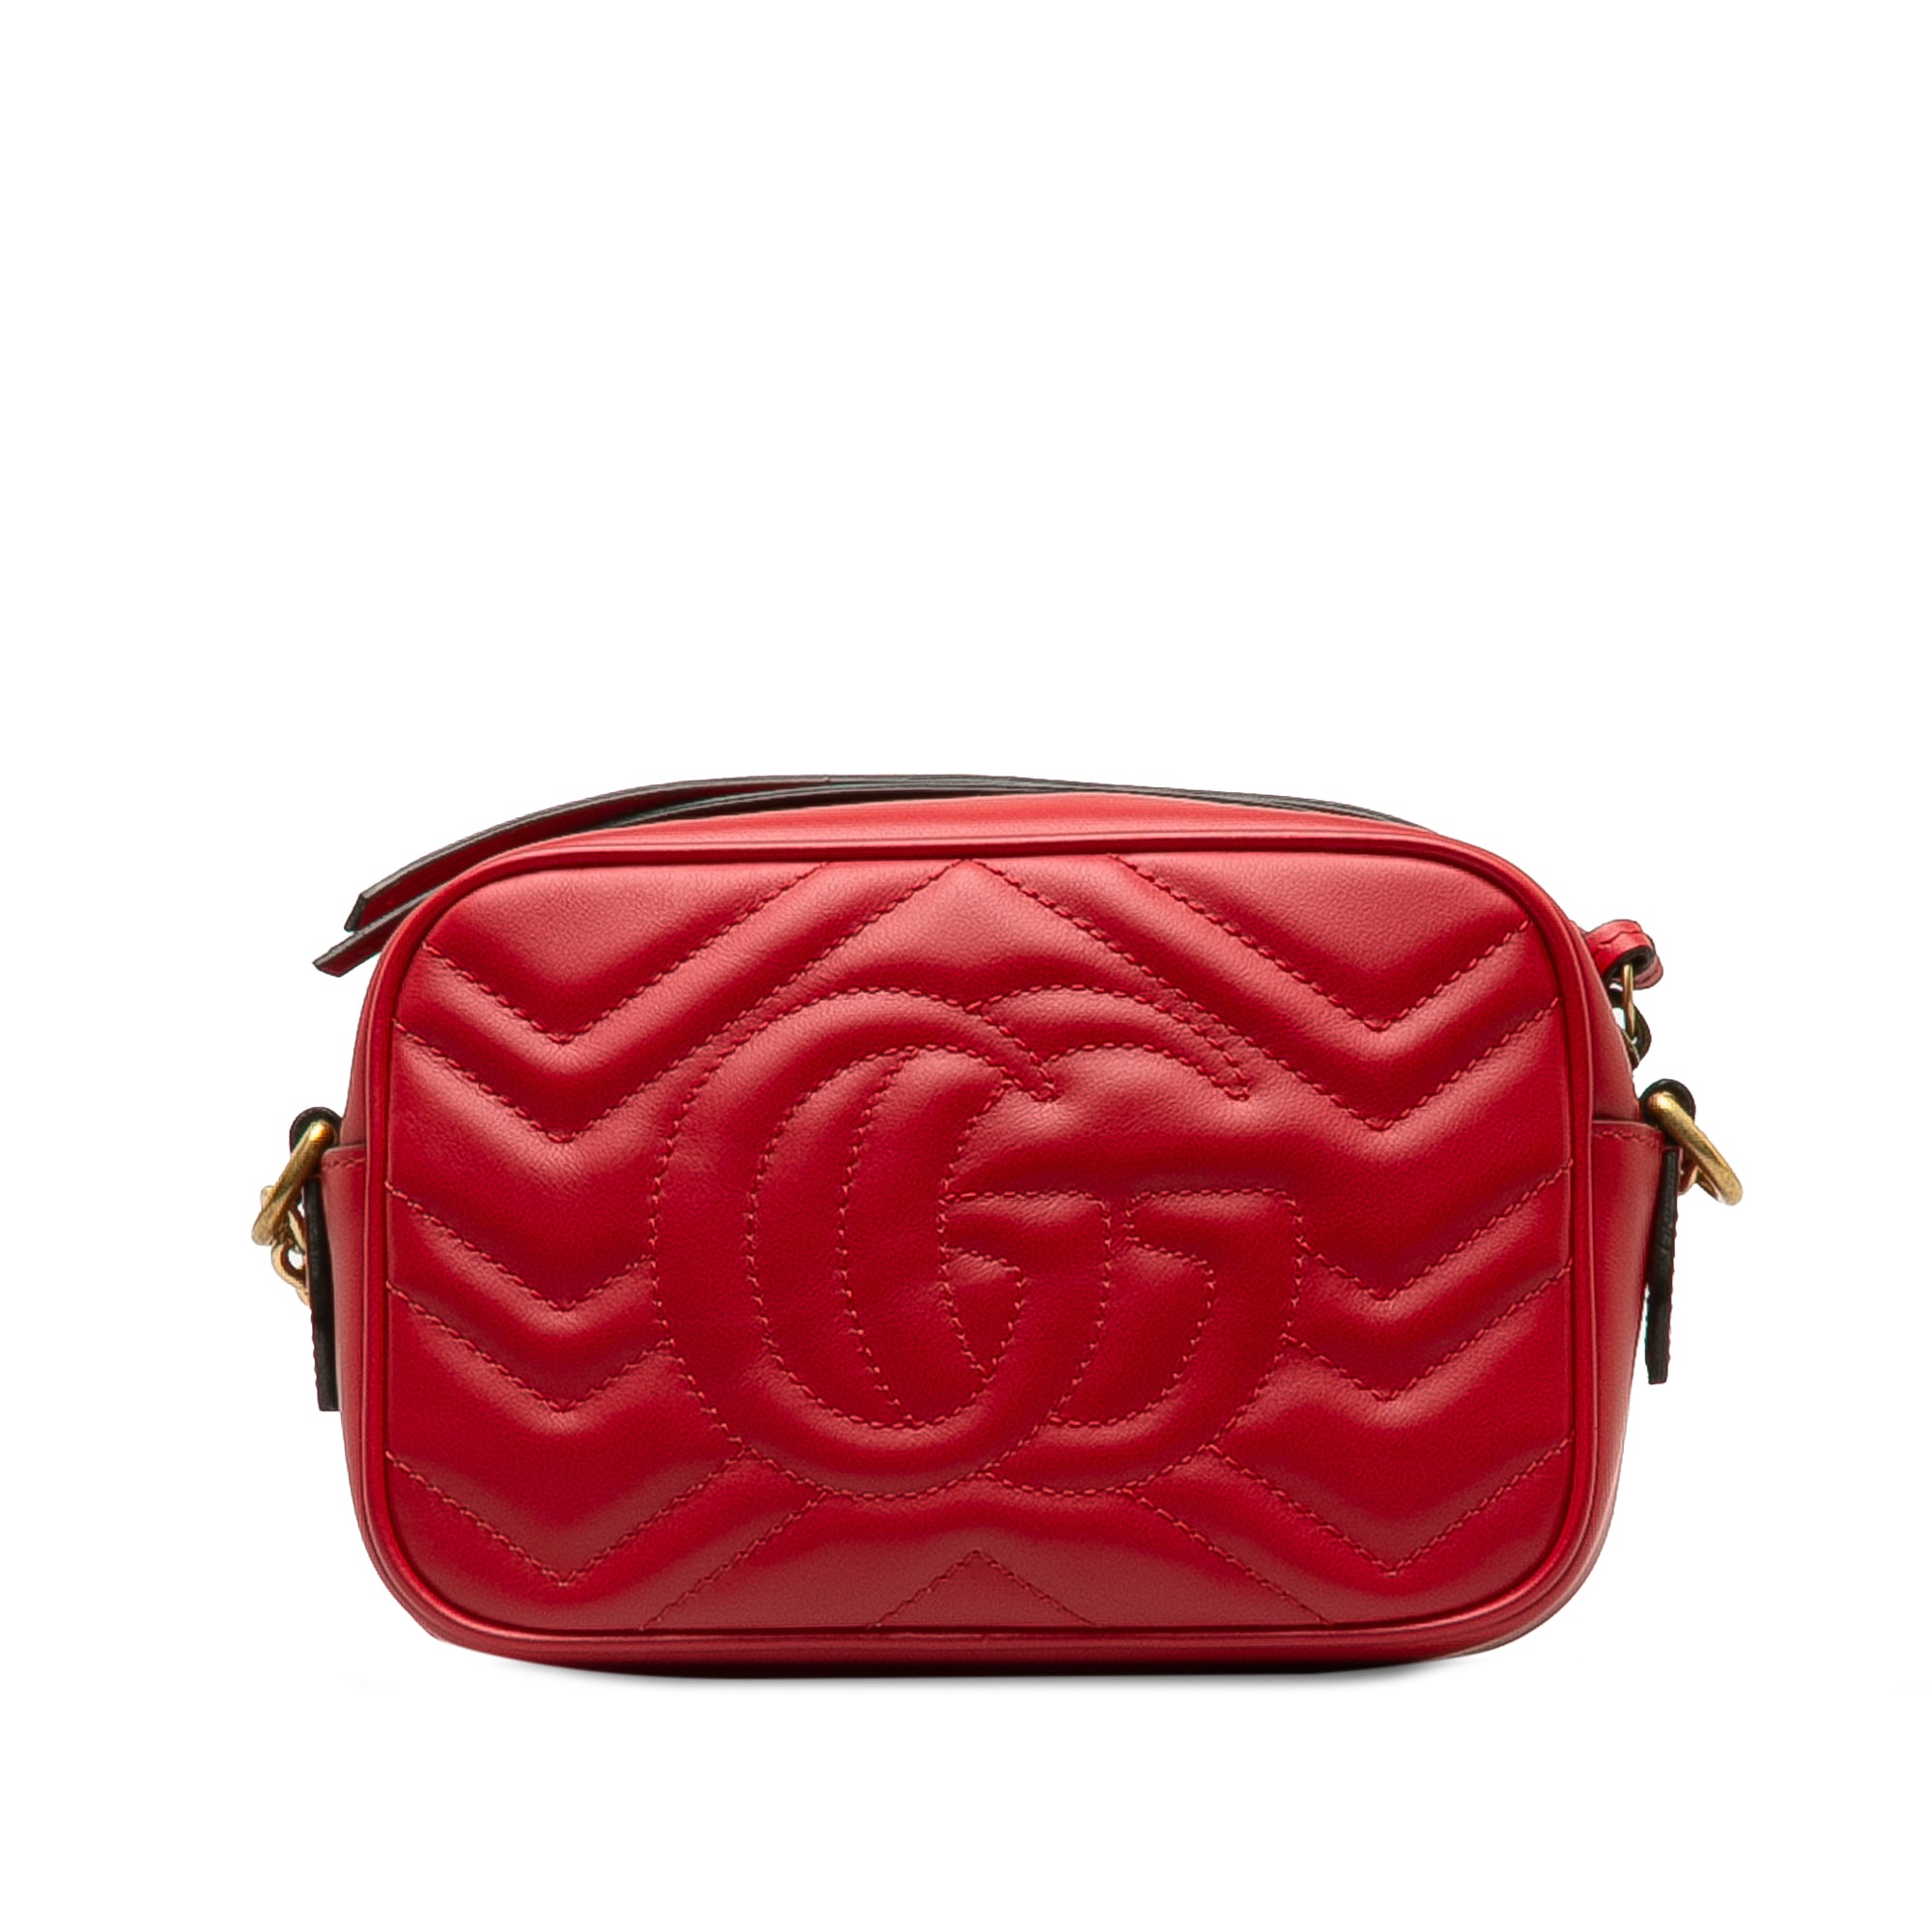 Gucci GG Marmont Crossbody Bag Red